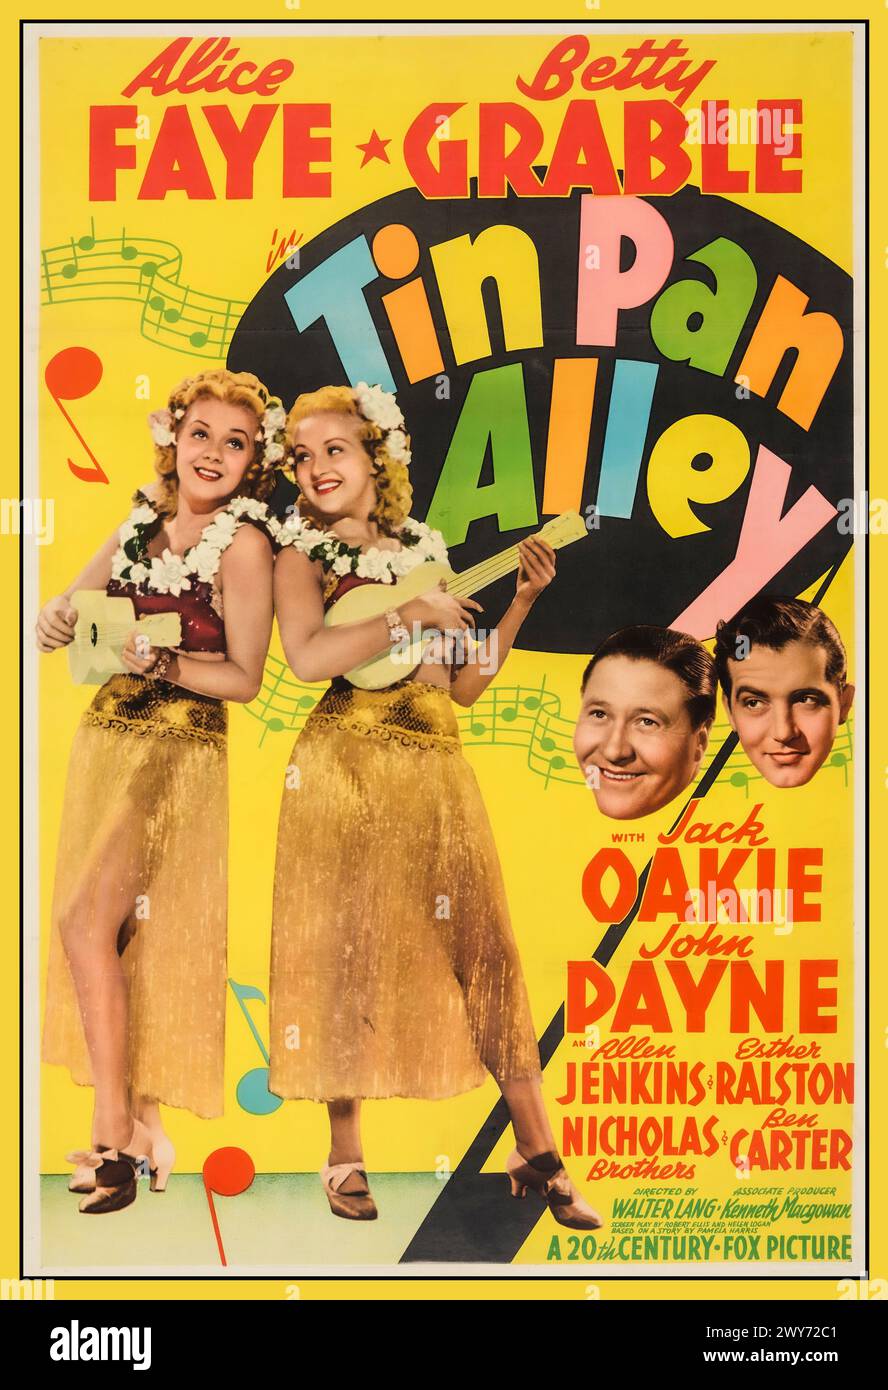 Tin Pan Alley poster for a 1940 musical film directed by Walter Lang and starring Alice Faye and Betty Grable (their only film together) as vaudeville singers/sisters and John Payne and Jack Oakie as songwriters in the years before World War I.    Alice Faye as Katie Blane/ Betty Grable as Lily Blane/ Jack Oakie as Harry Calhoun/ John Payne as Francis 'Skeets' Harrigan./ Allen Jenkins as Casey./ Esther Ralston as Nora Bayes Fayard Nicholas as Dance Specialty/ Harold Nicholas as Dance Specialty./ Ben Carter as Boy/ John Loder as Captain Reginald 'Reggie' Carstair /Elisha Cook Jr. as Joe Codd/ Stock Photo